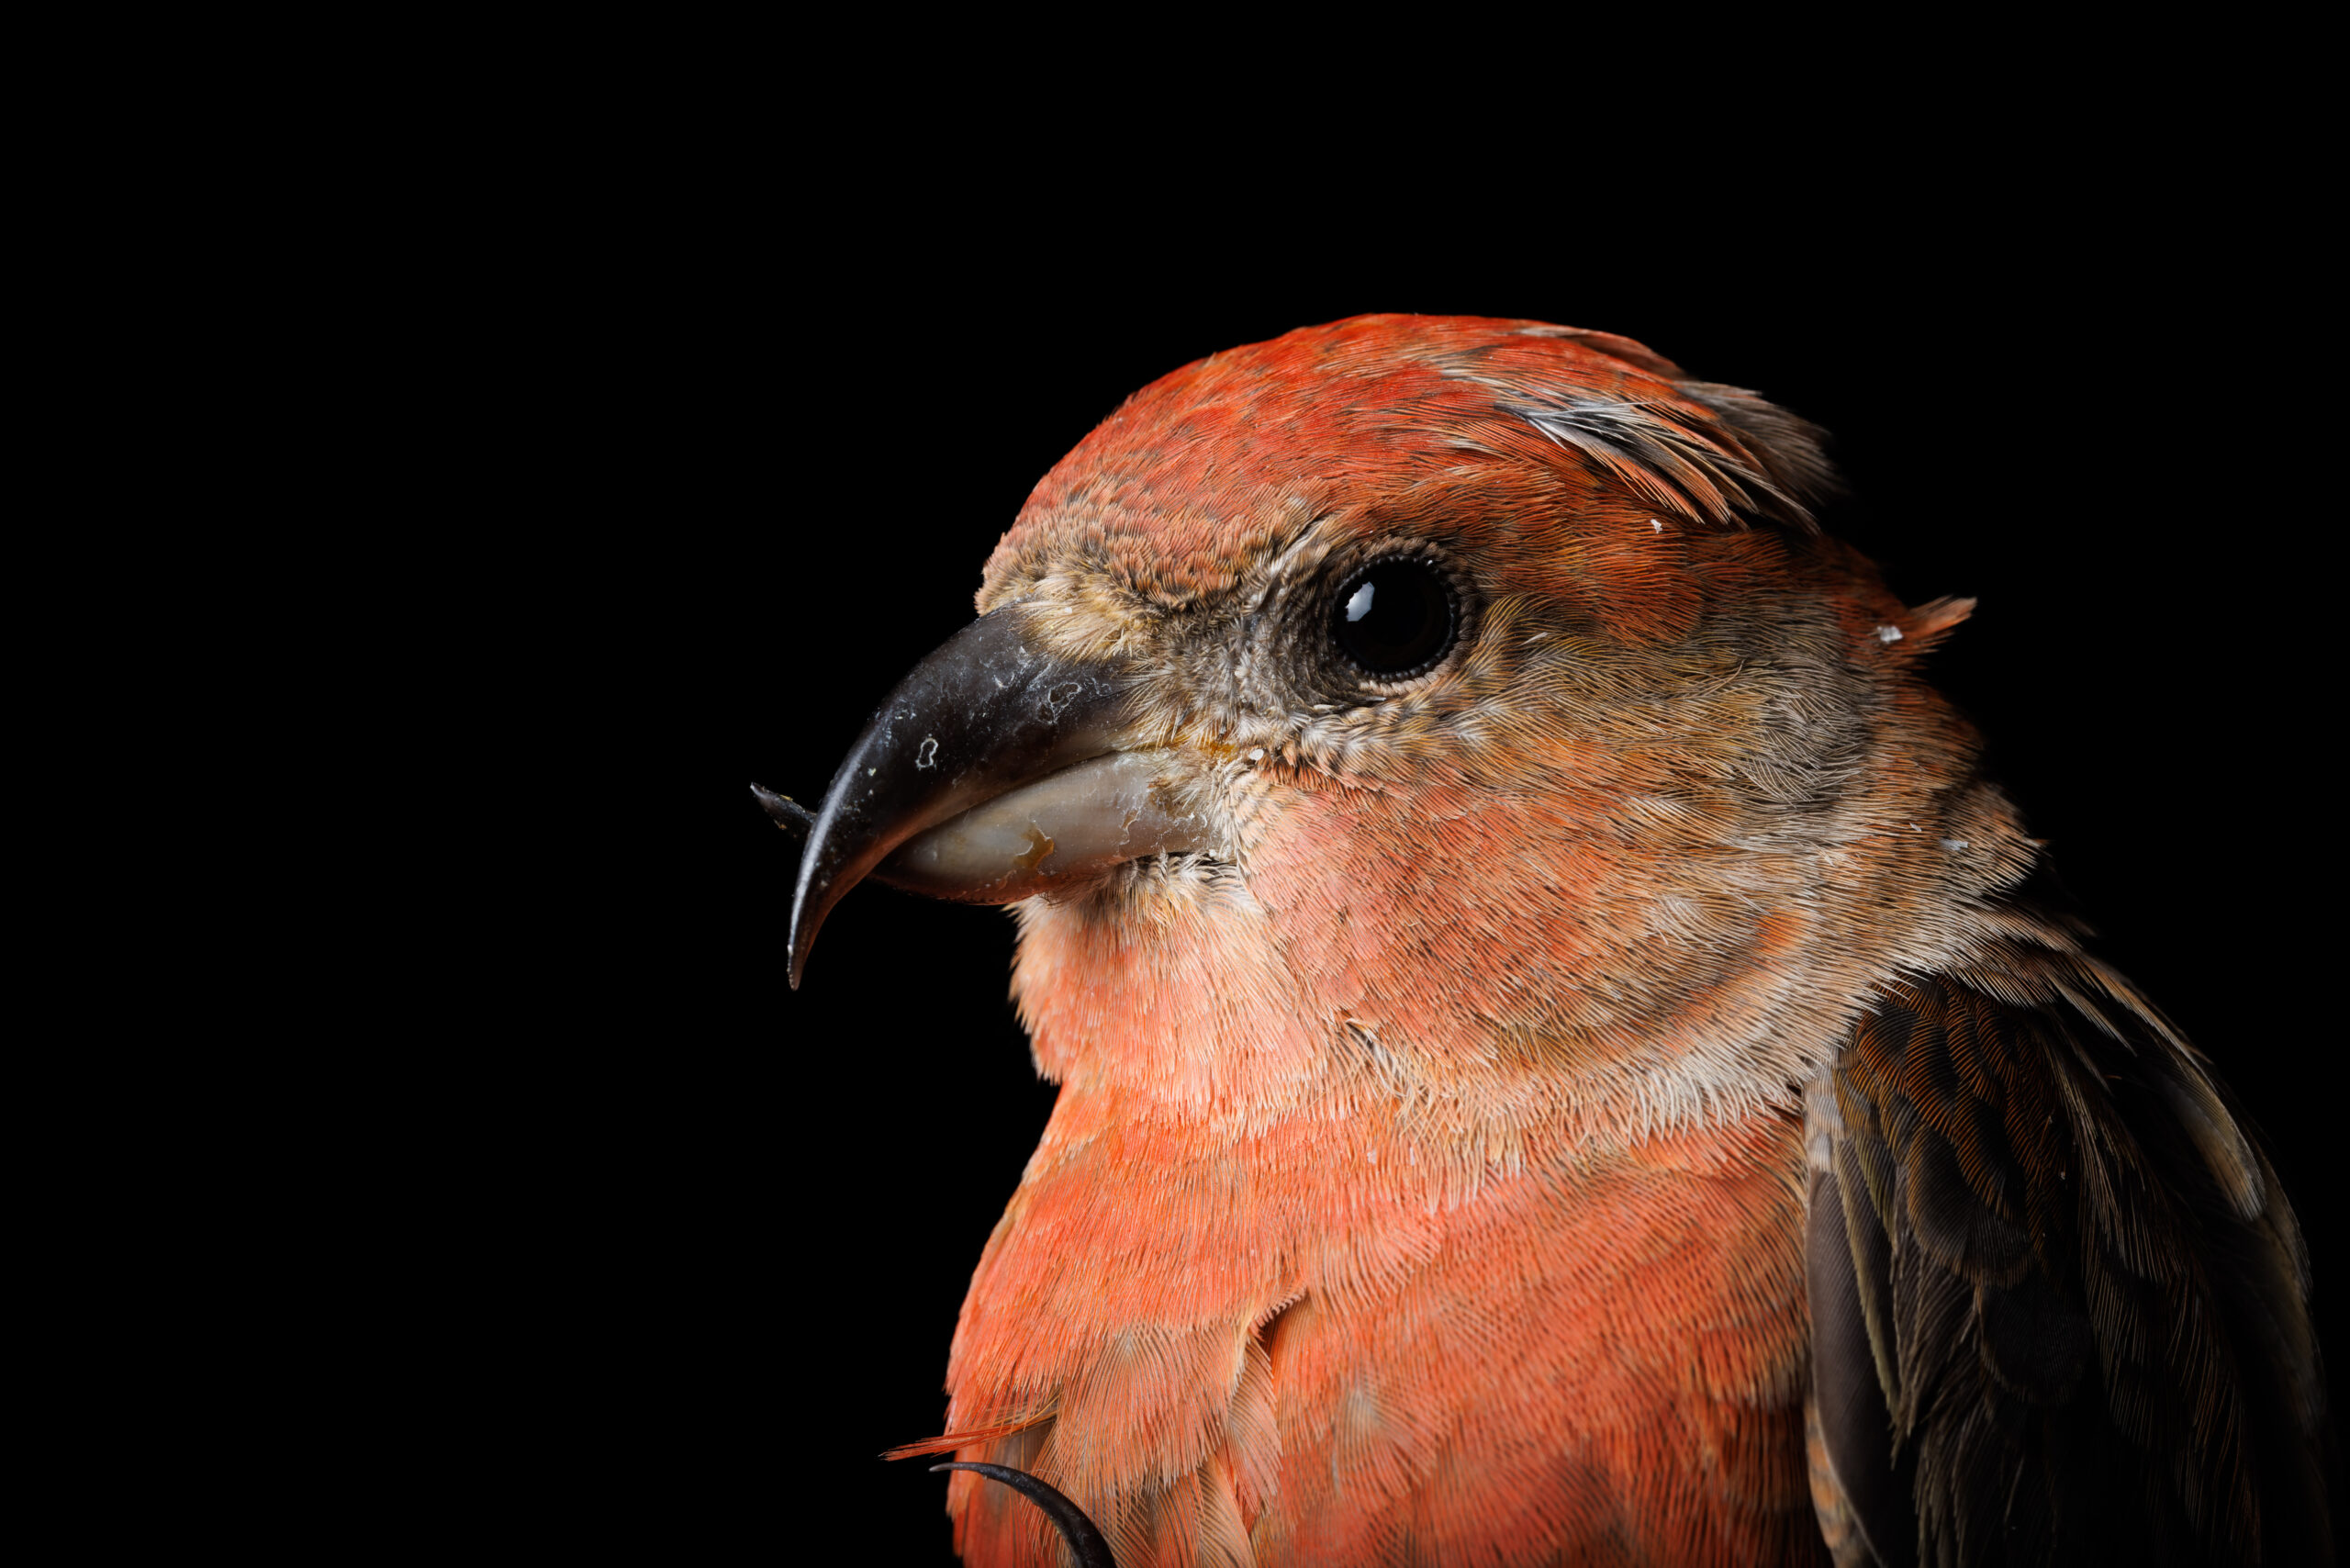 a closeup of a male Red Crossbill's head. His red feathers are glowing in the light, highlighted by the pure black background behind him. His sharp hooked bill shows the characteristic mismatched upper and lower mandibles.